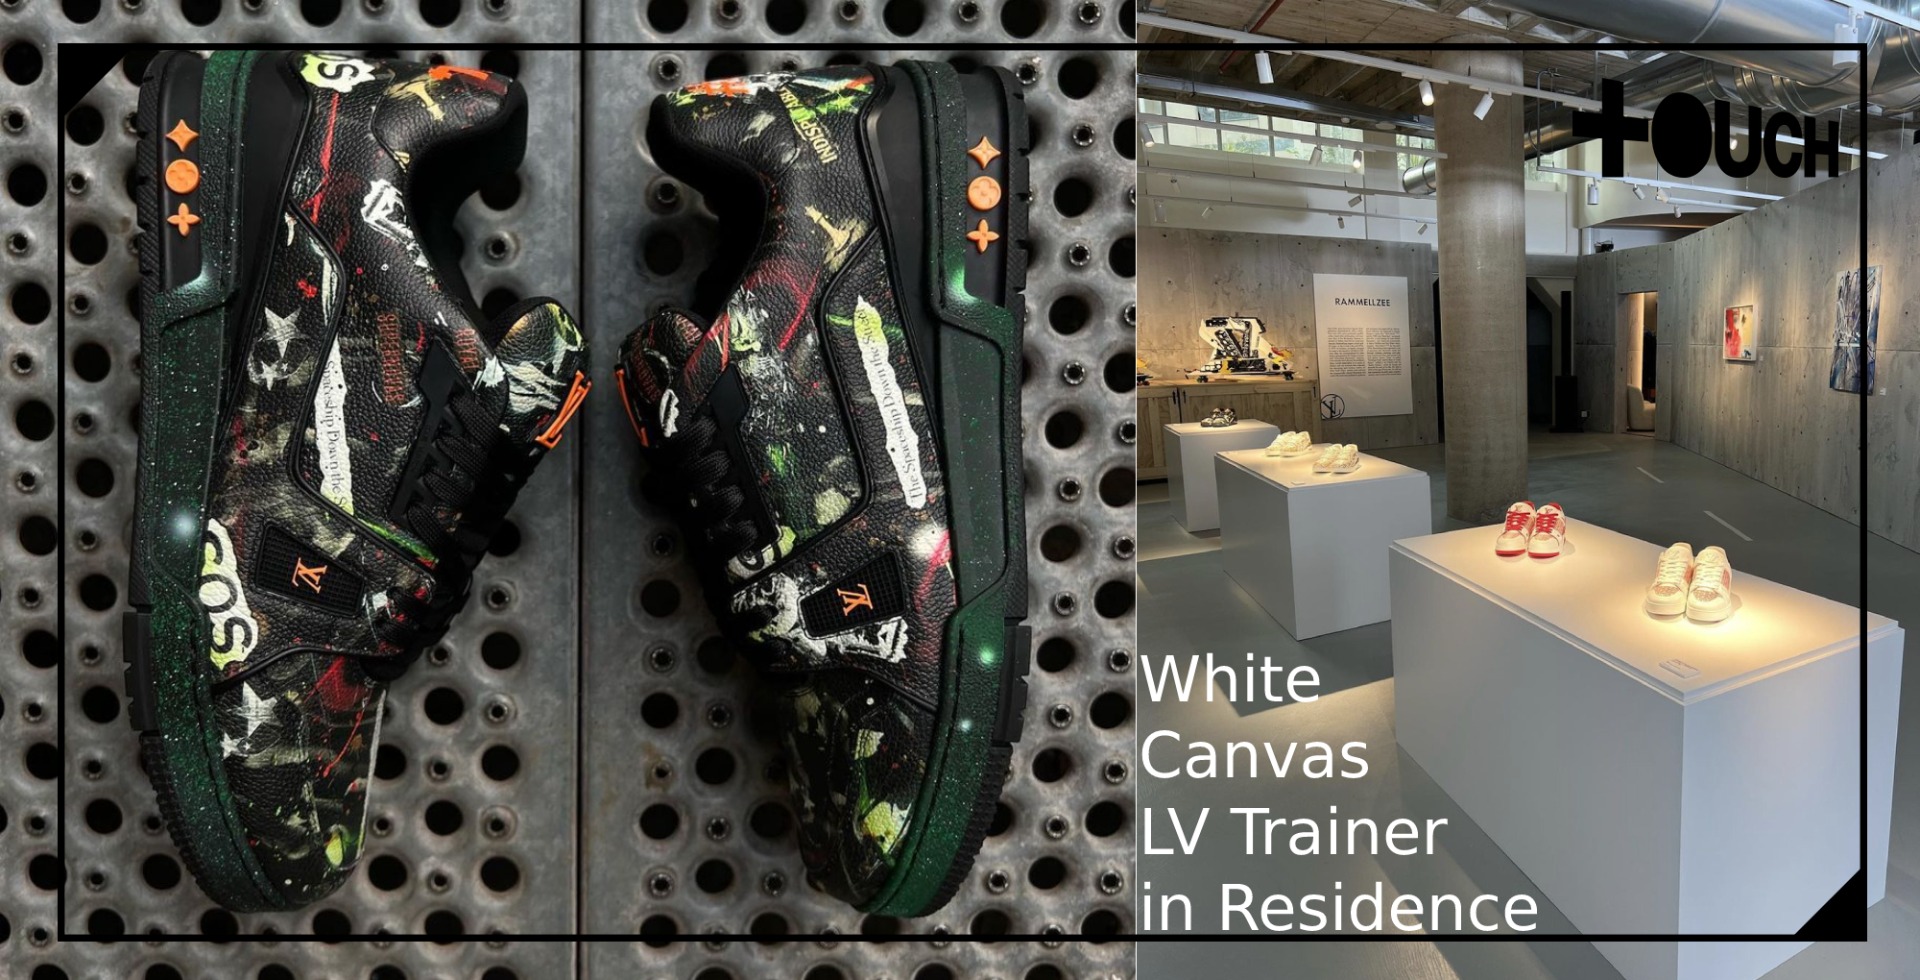 White Canvas: LV Trainer in Residence